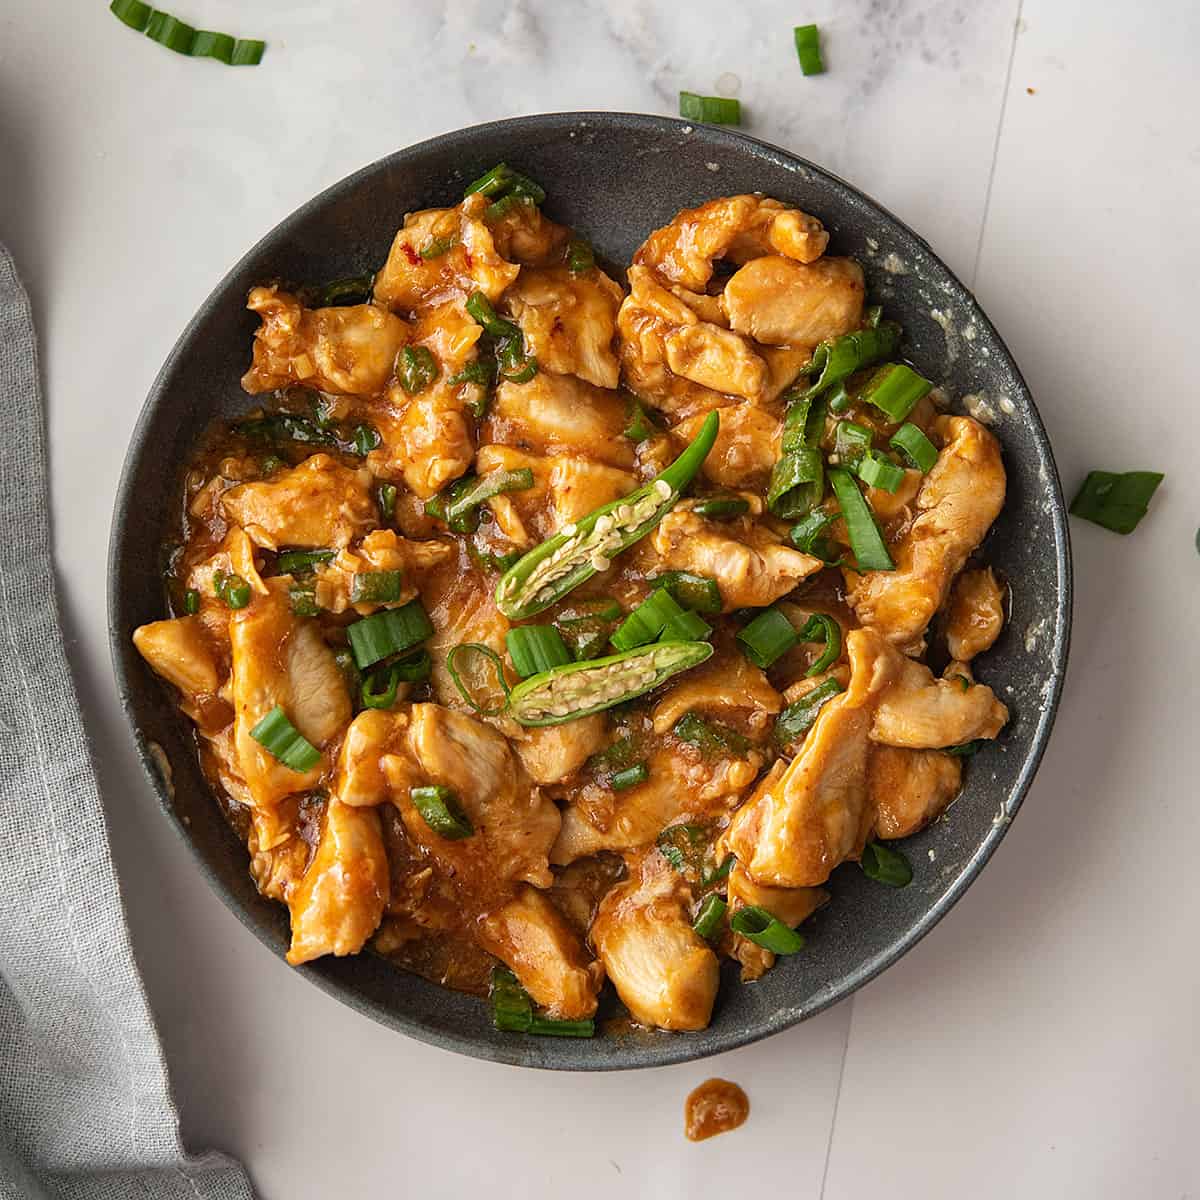 Hot and spicy Chinese chicken